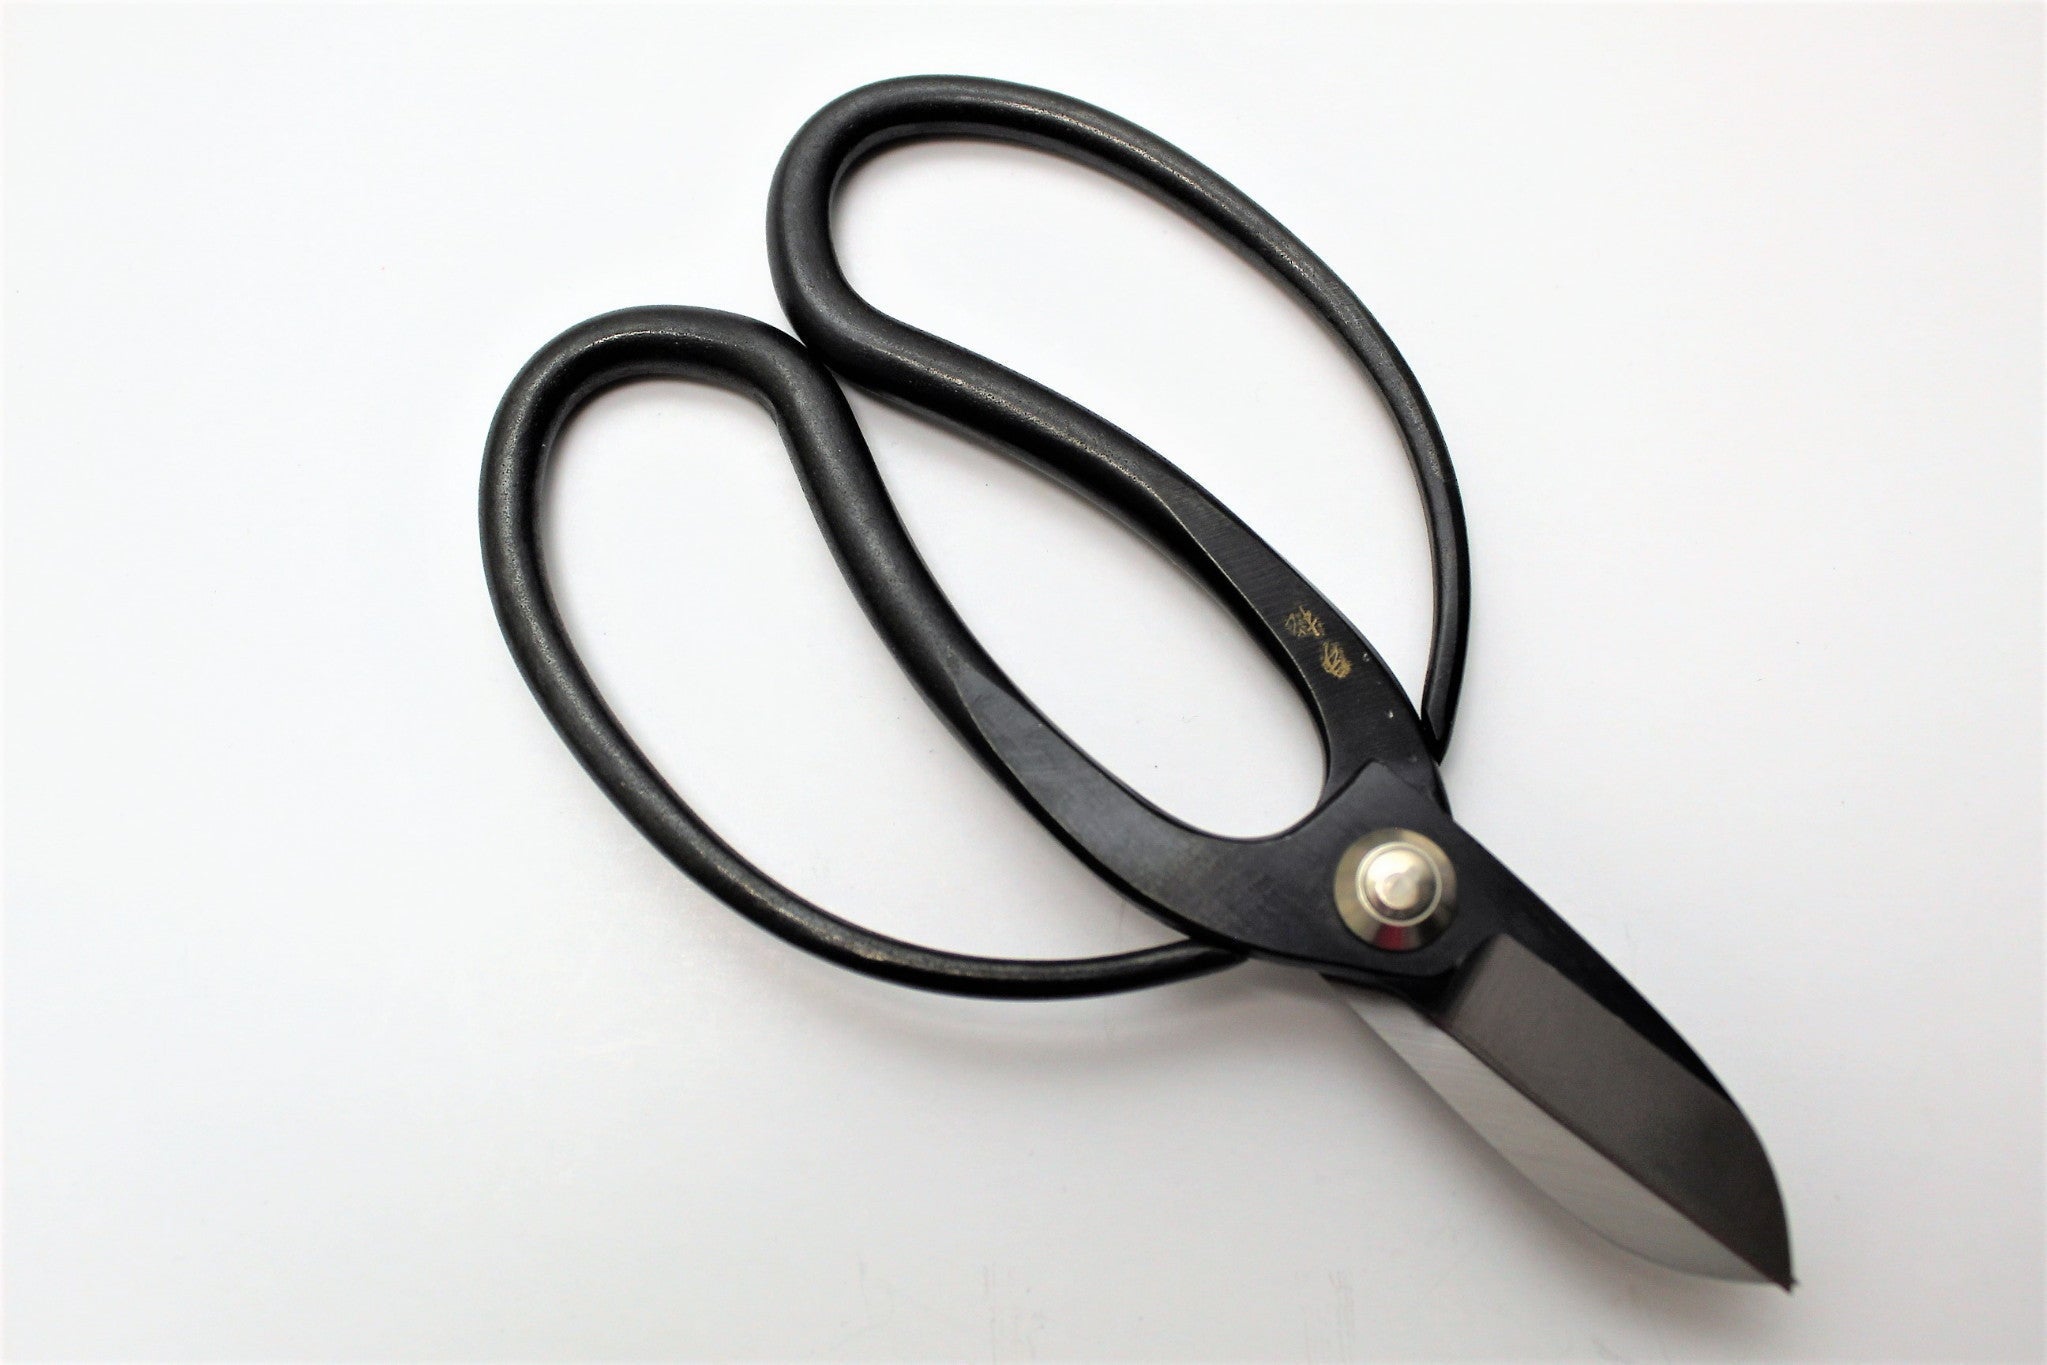 Japanese Scissors. Daily use for 7 years. Inherited from my late grandpa.  Carbon steel - bluish tint. : r/BuyItForLife